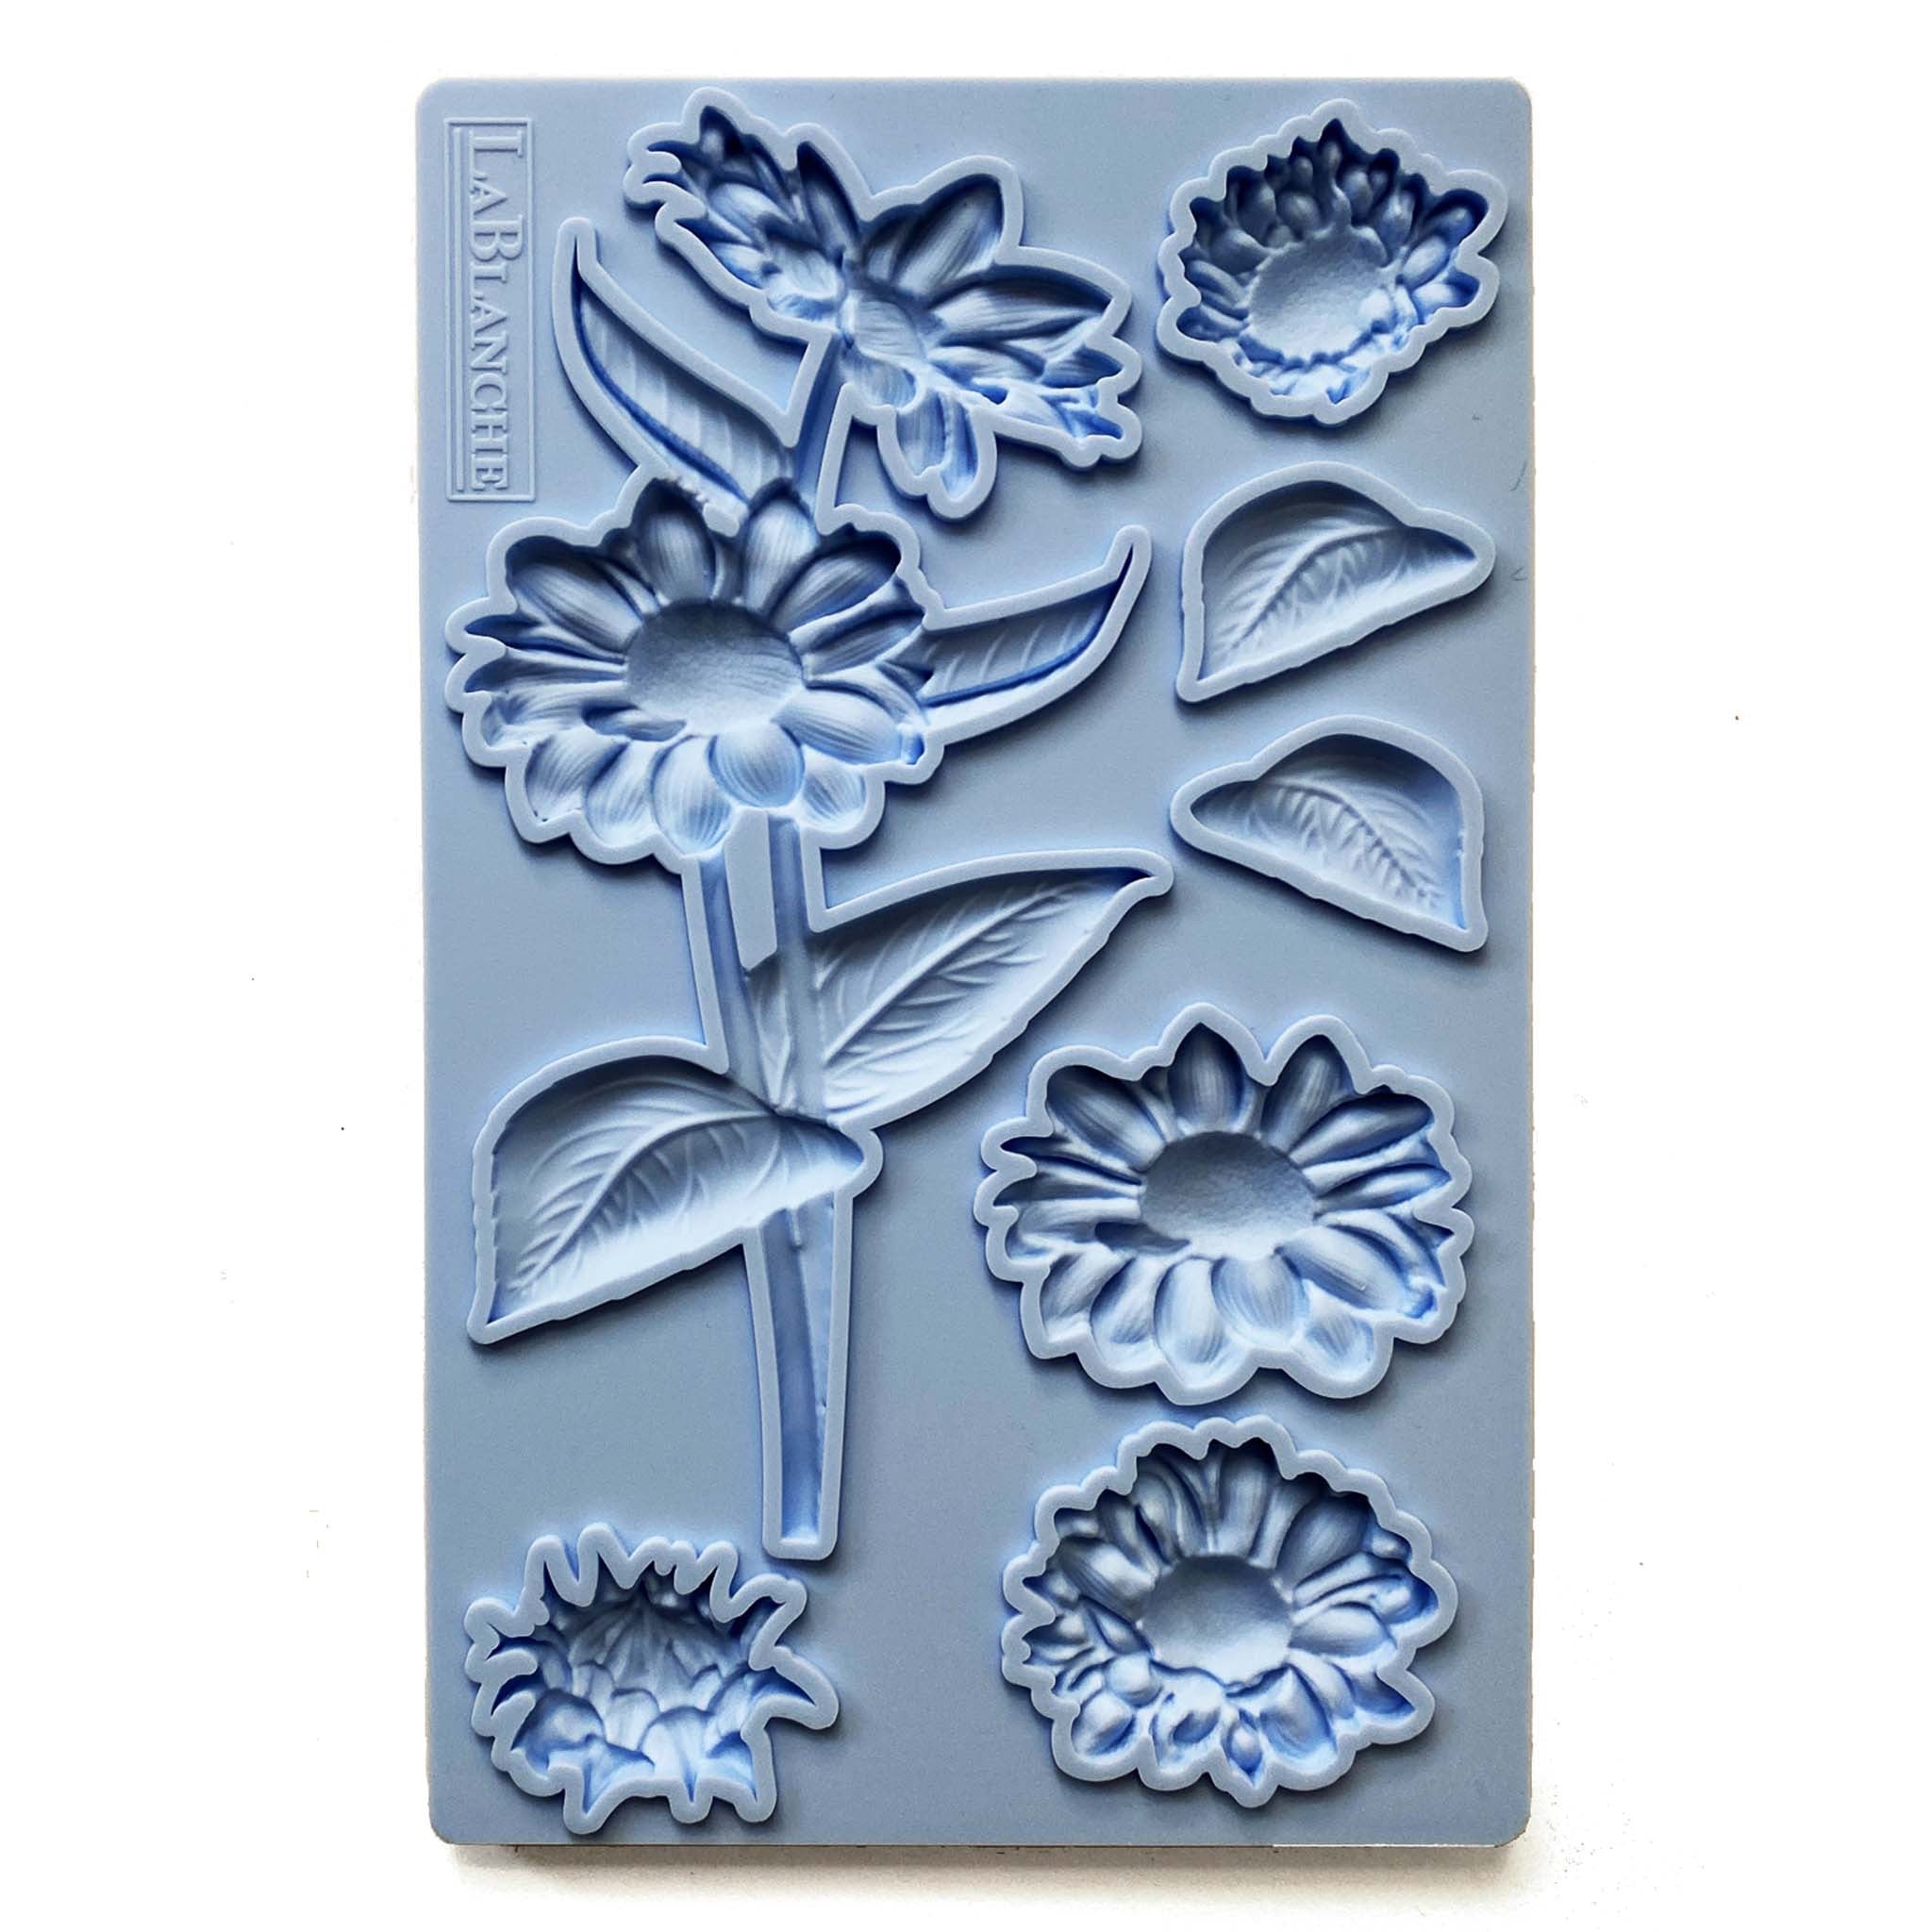 A 5" x 8" blue silicone mold of Gerbera flowers is on a white background.